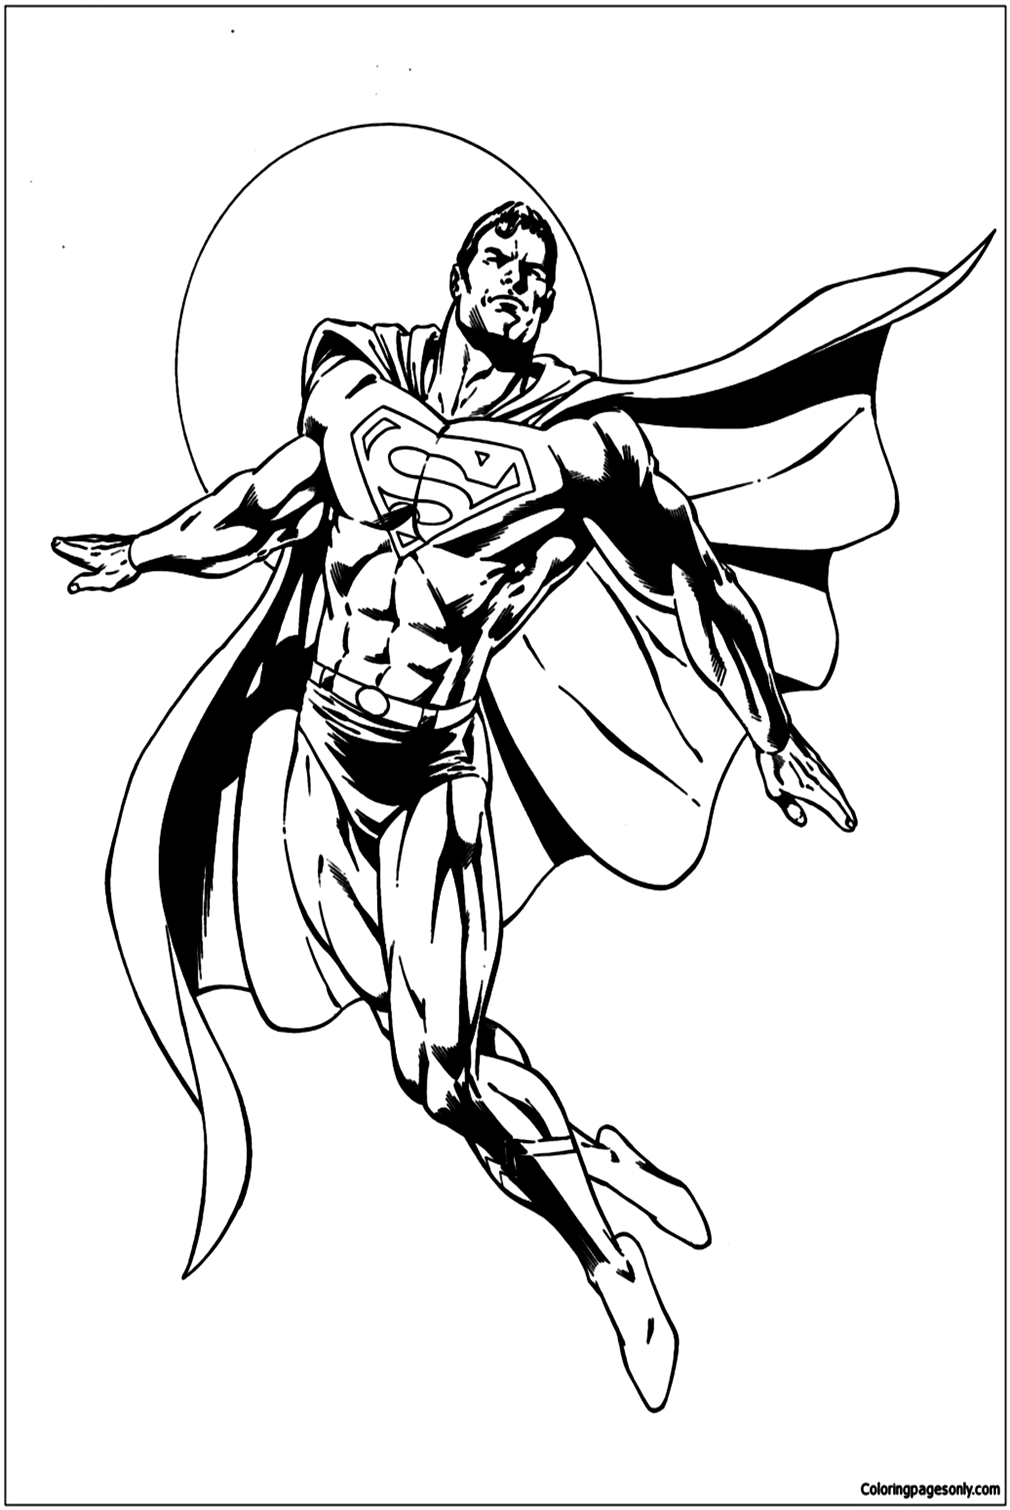 Incredible Superman Coloring Pages